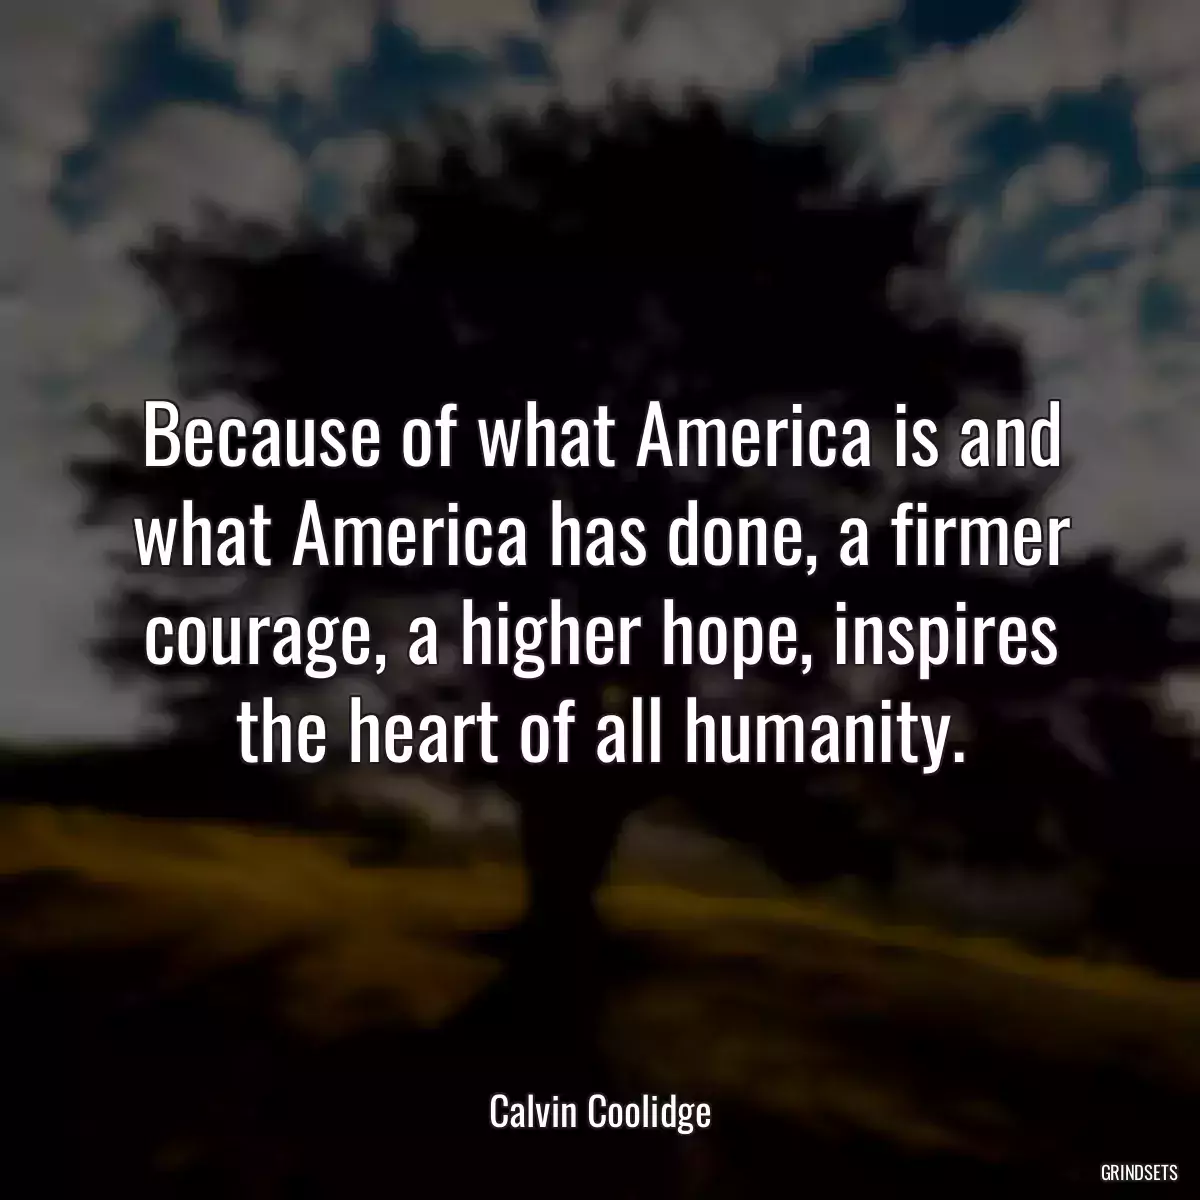 Because of what America is and what America has done, a firmer courage, a higher hope, inspires the heart of all humanity.